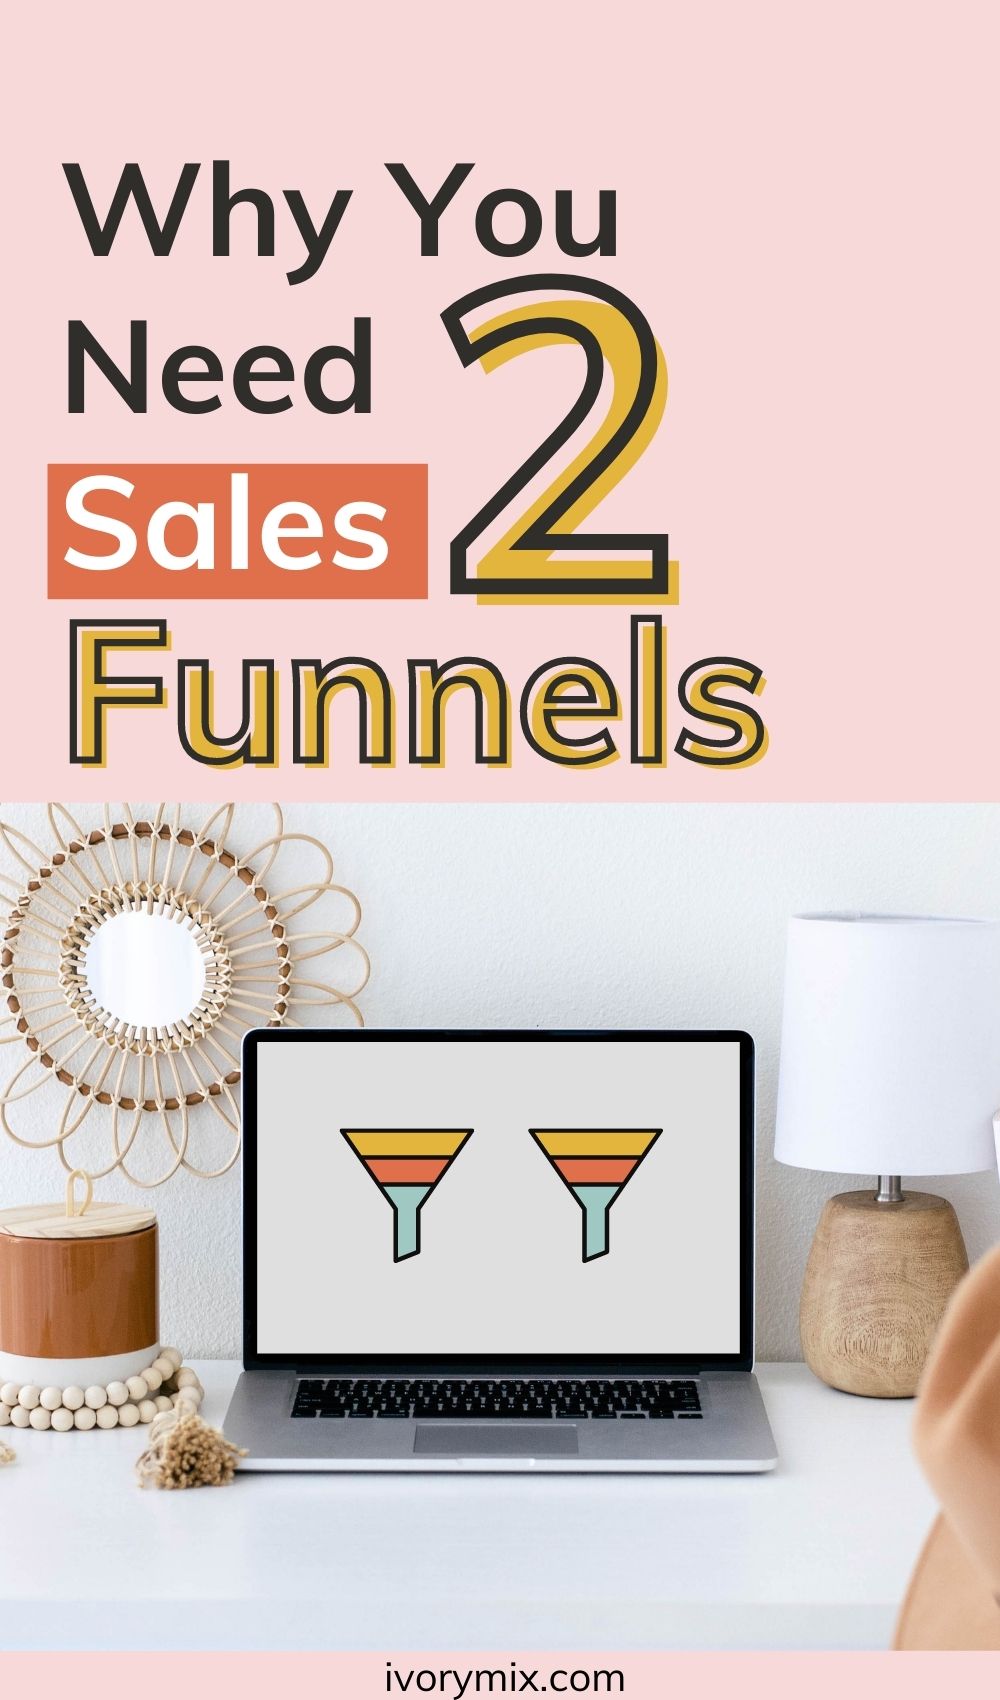 why you need 2 types of sales funnels on instagram (evergreen and launches)